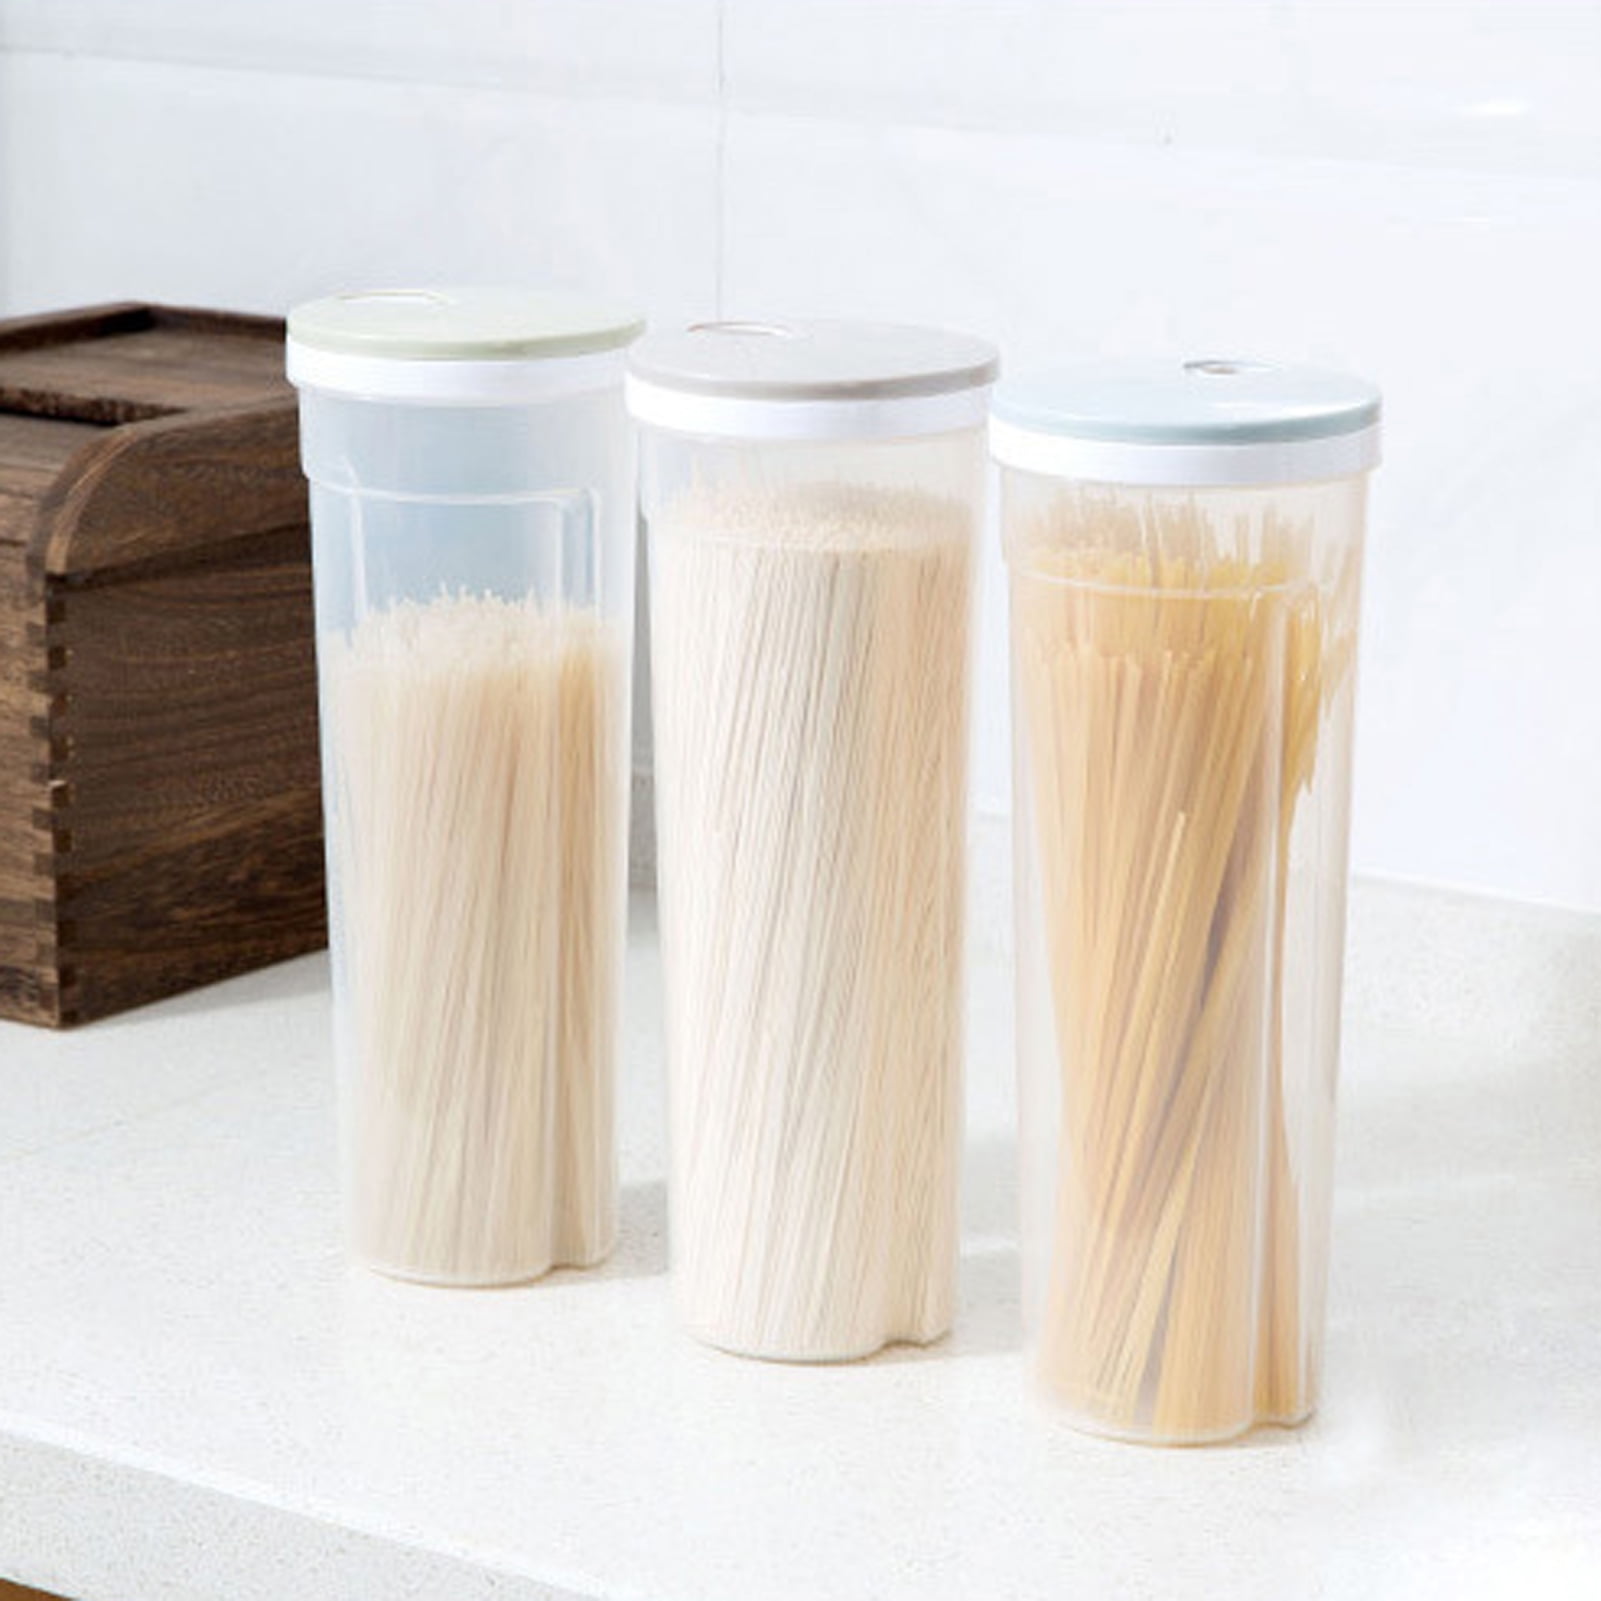 Canister Cereal Crisper Container Spaghetti Pasta Noodle Storage Box Snacks Chopsticks Holder with Measure Lid Storage Box Food 